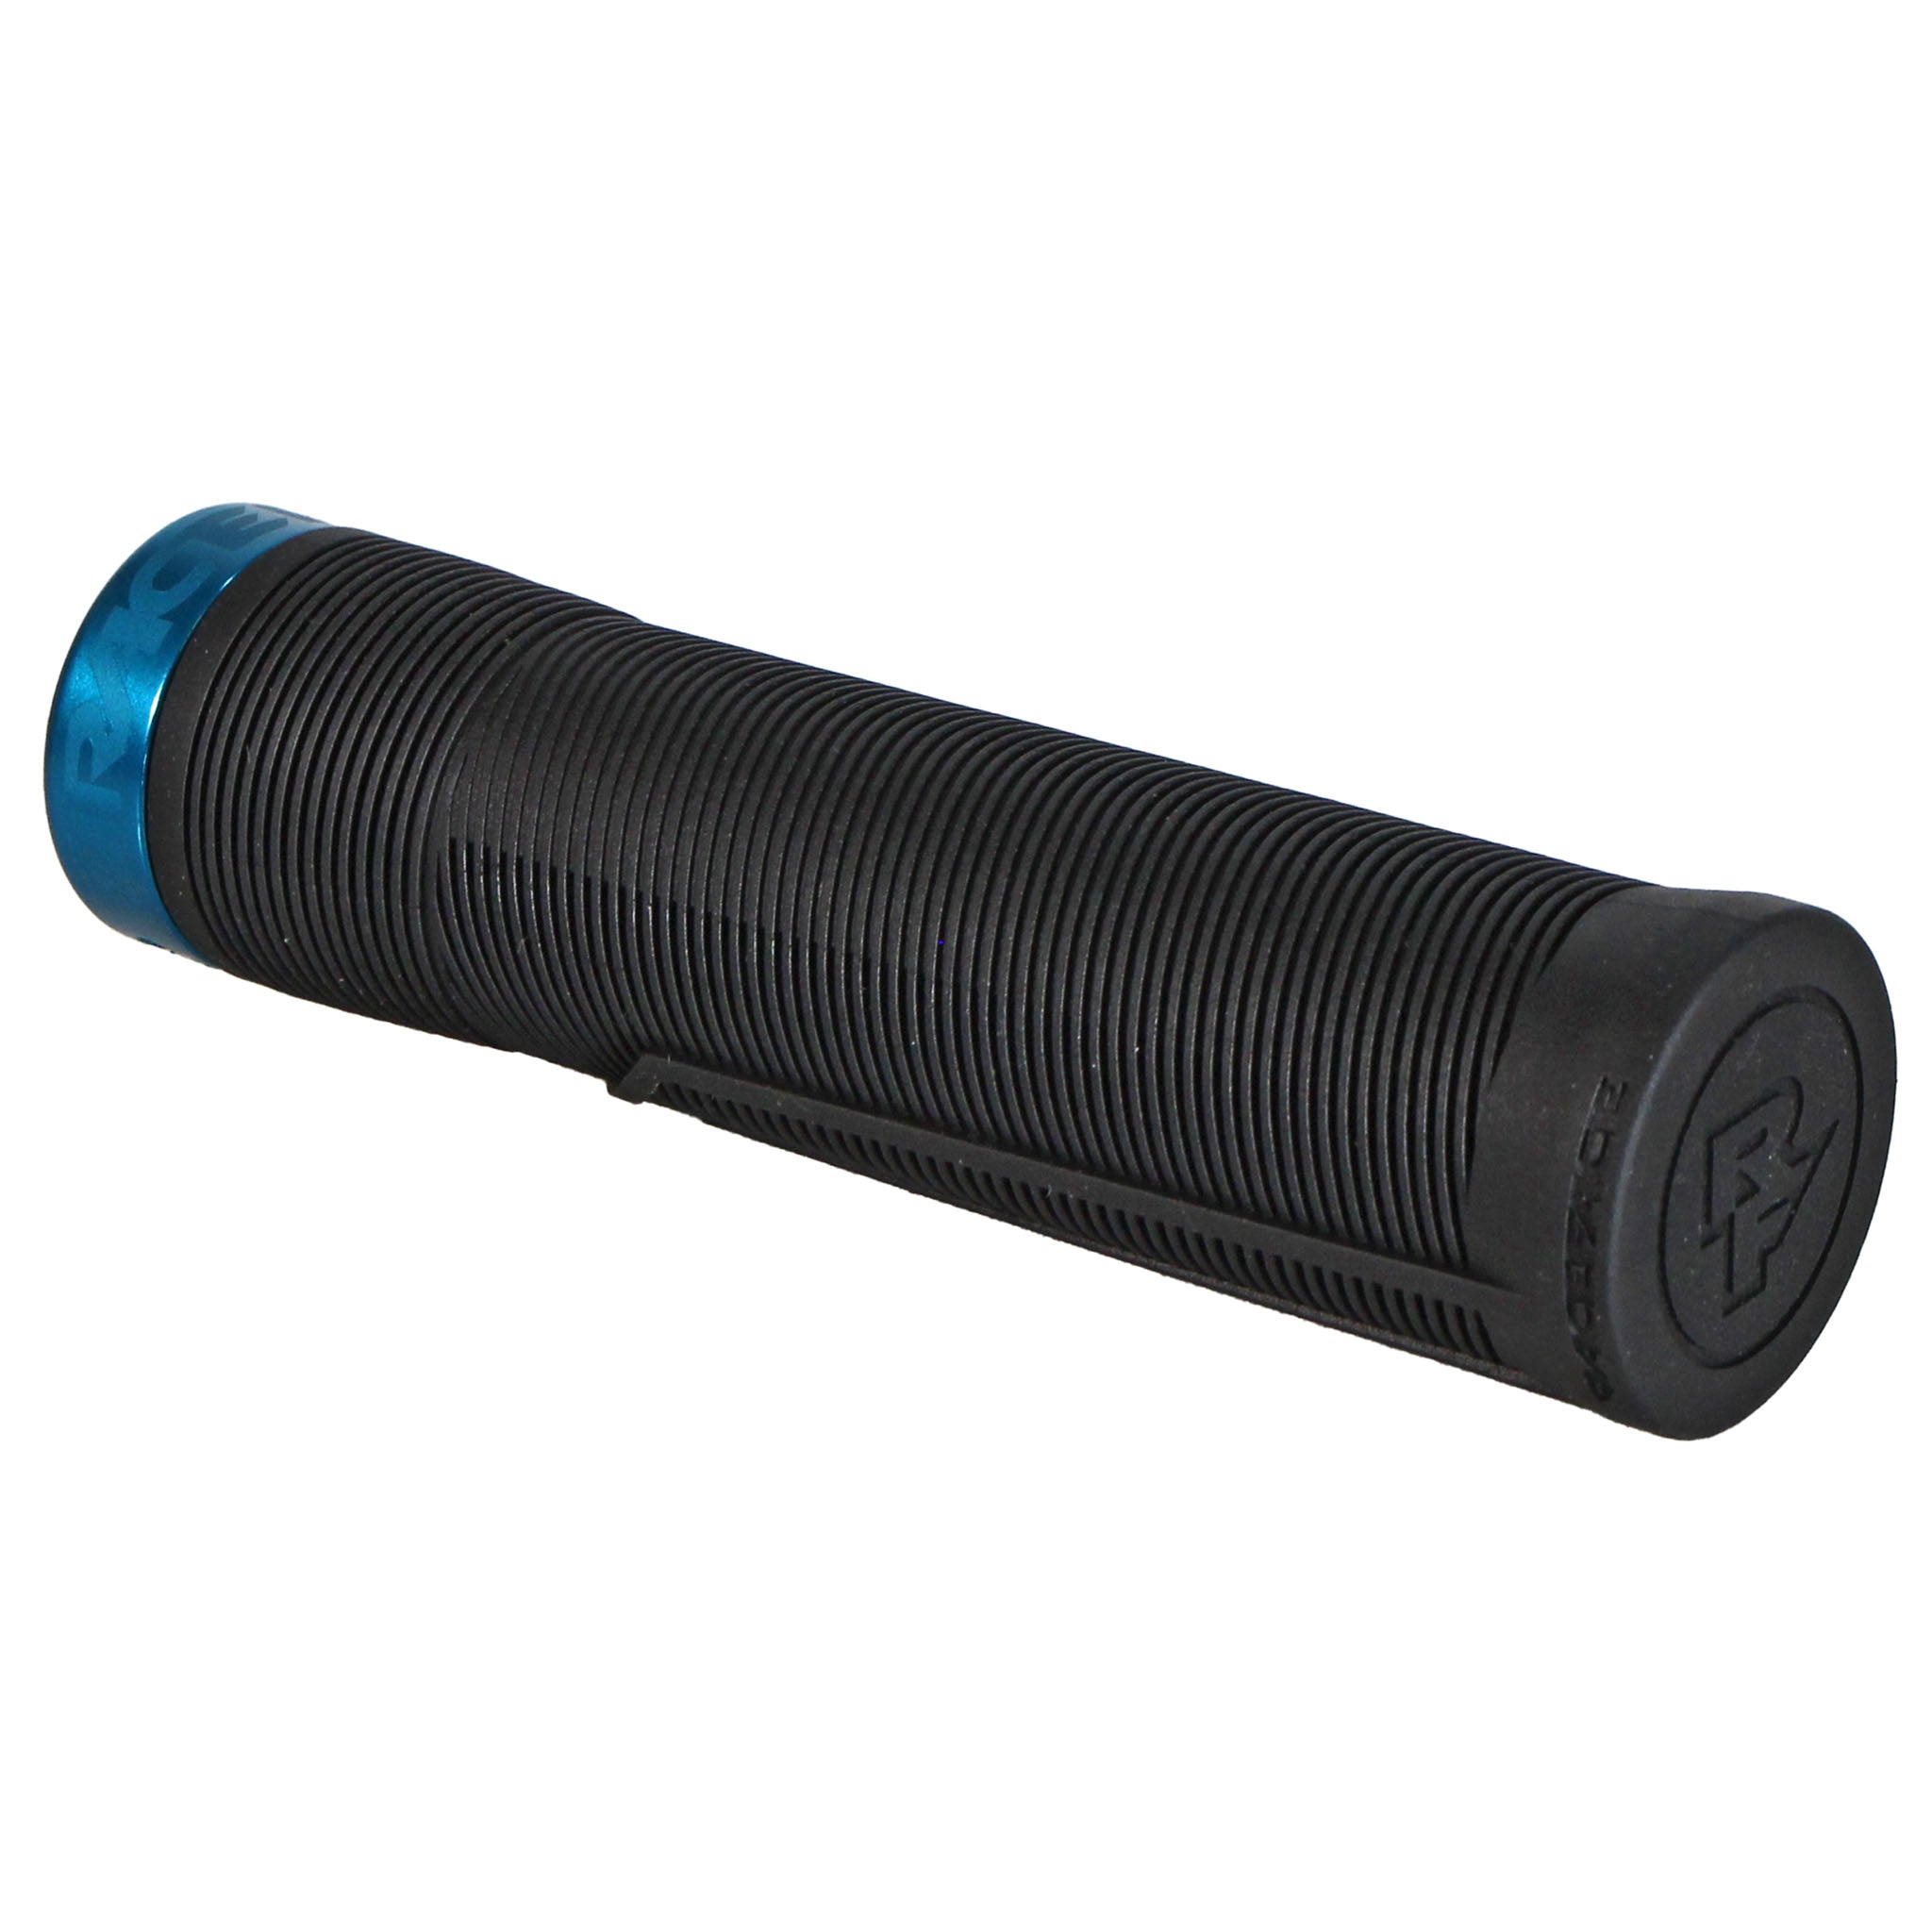 RaceFace Chester Grips - Lock-On Black/Turquoise 34mm